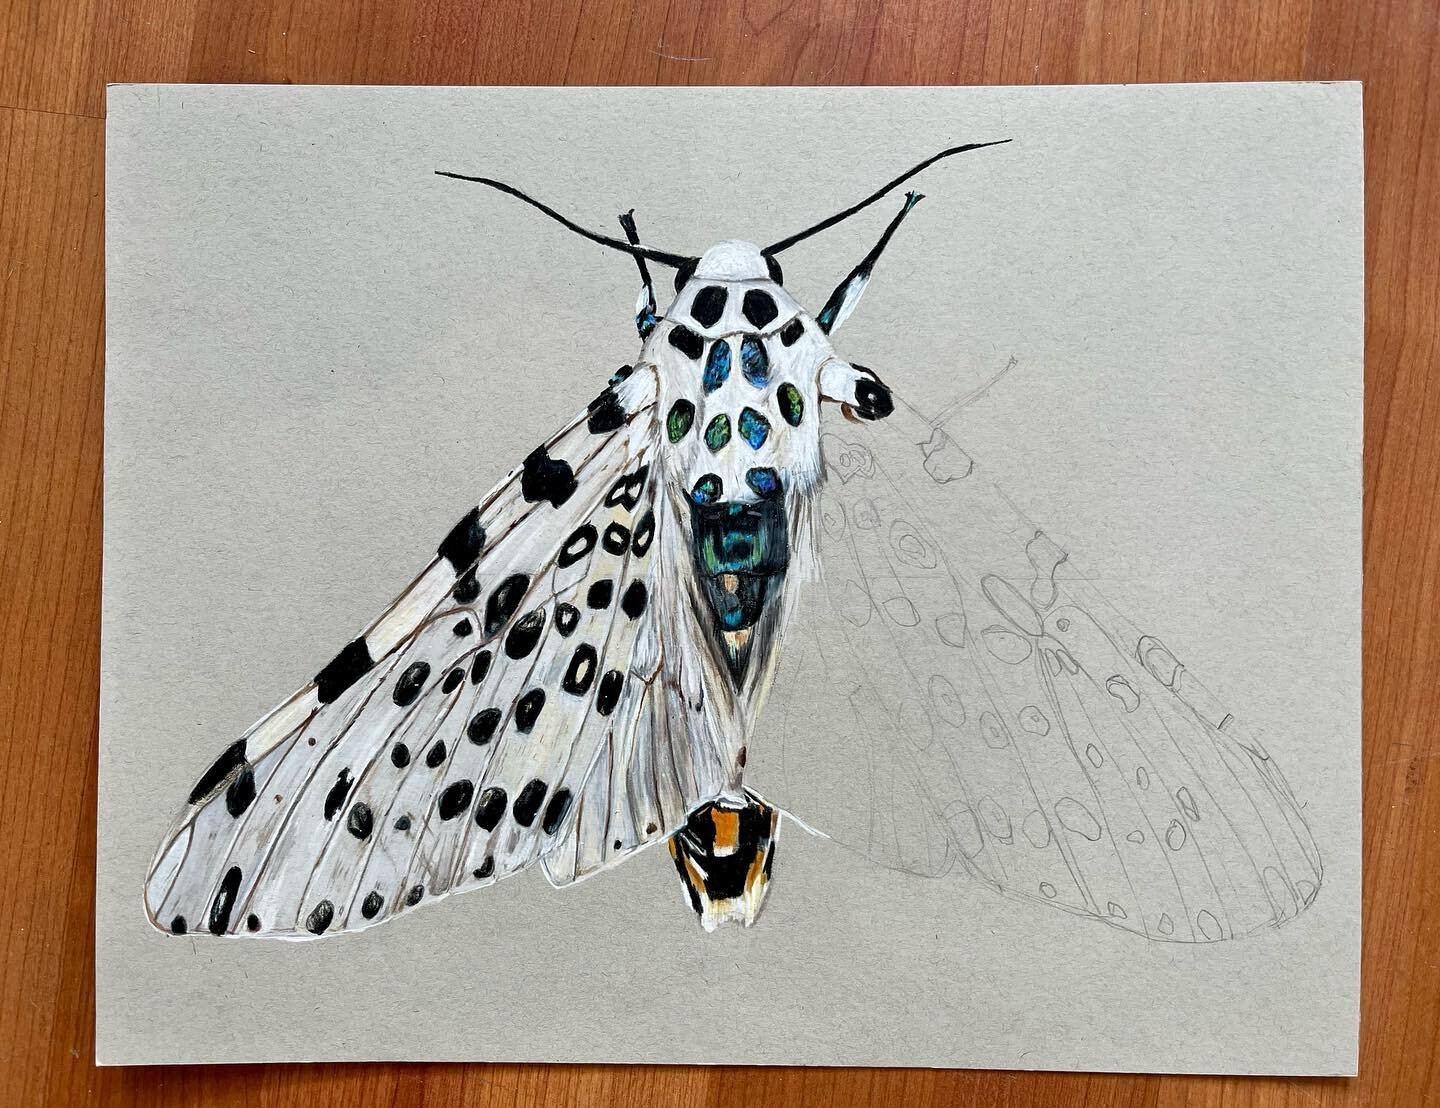 Half finished but already my favorite, translucency and iridescence 😬&mdash;giant leopard moth